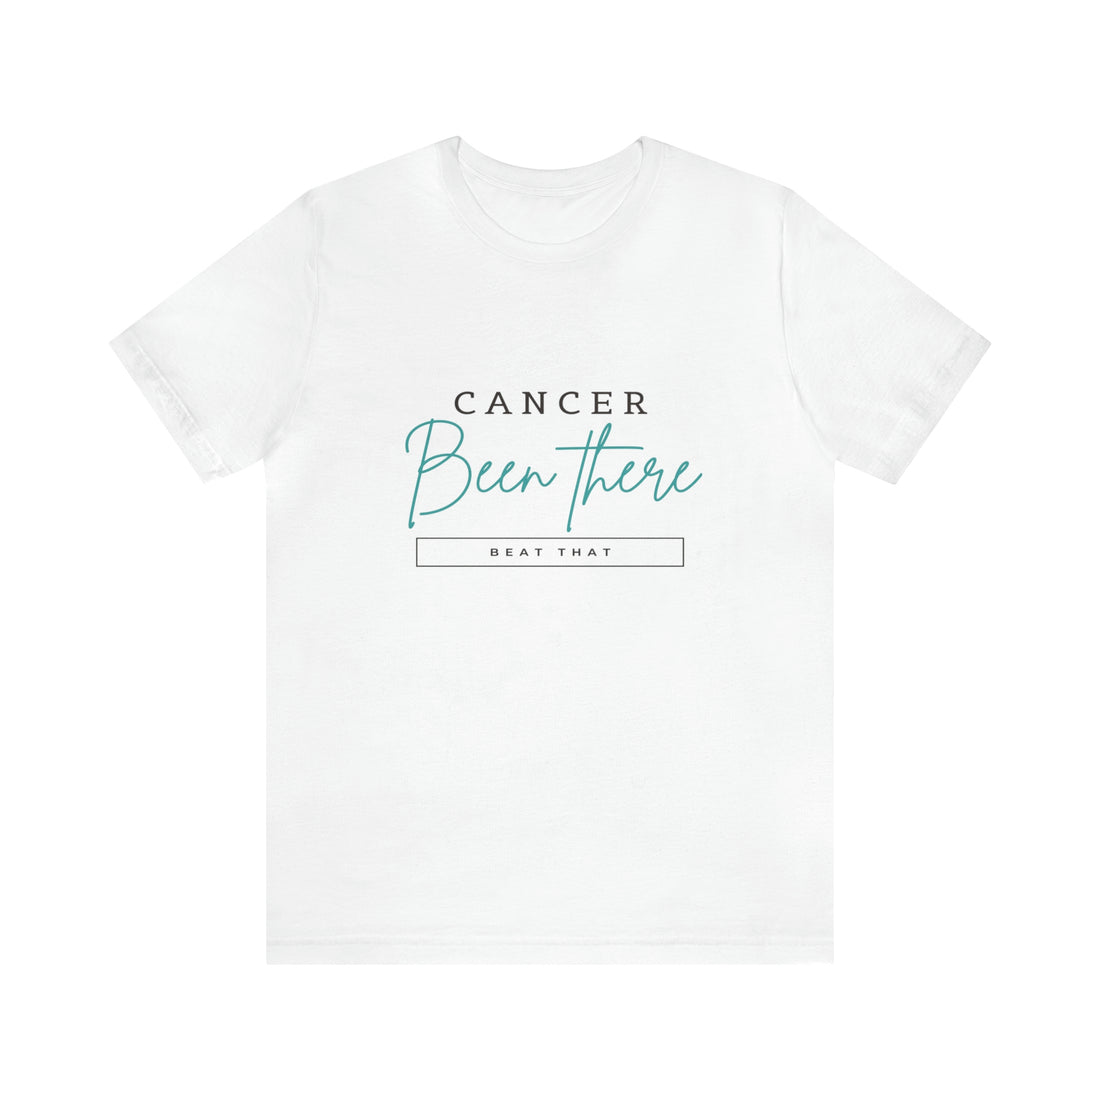 Cancer Been There Beat That - Unisex Jersey Short Sleeve Tee